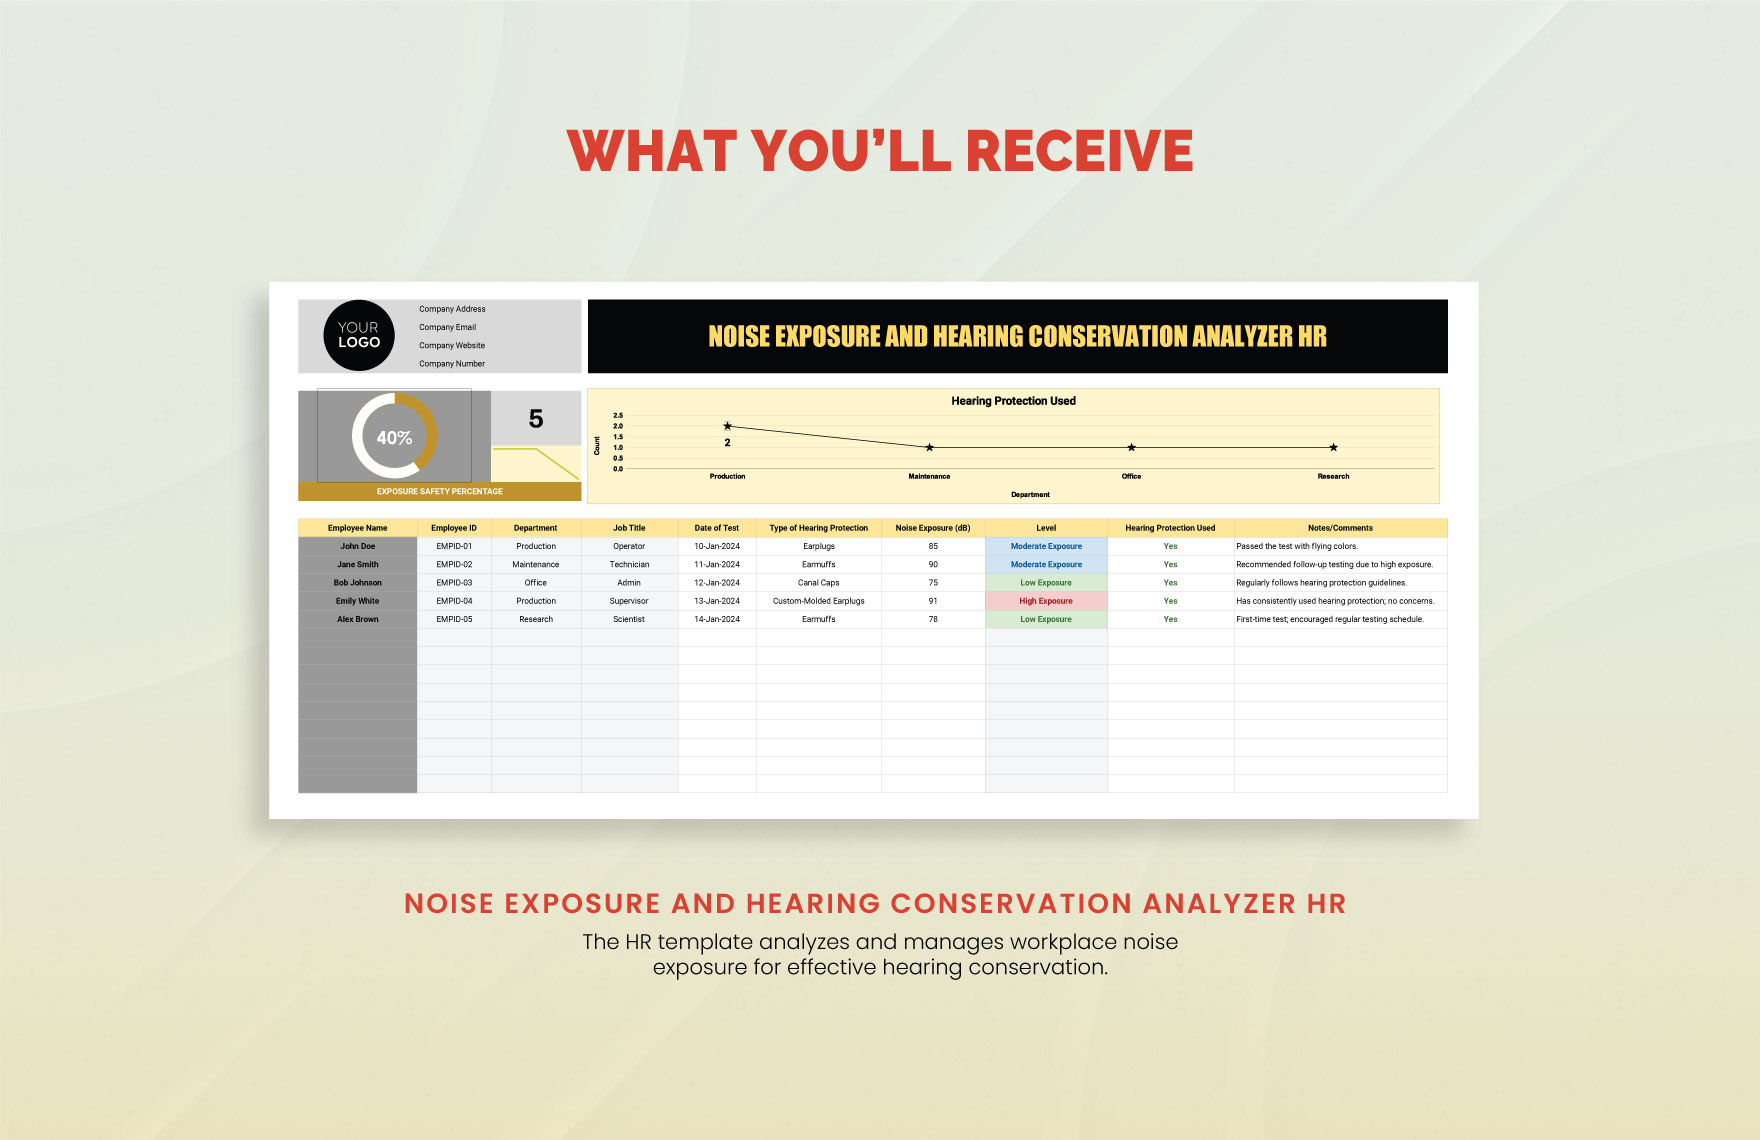 Noise Exposure and Hearing Conservation Analyzer HR Template